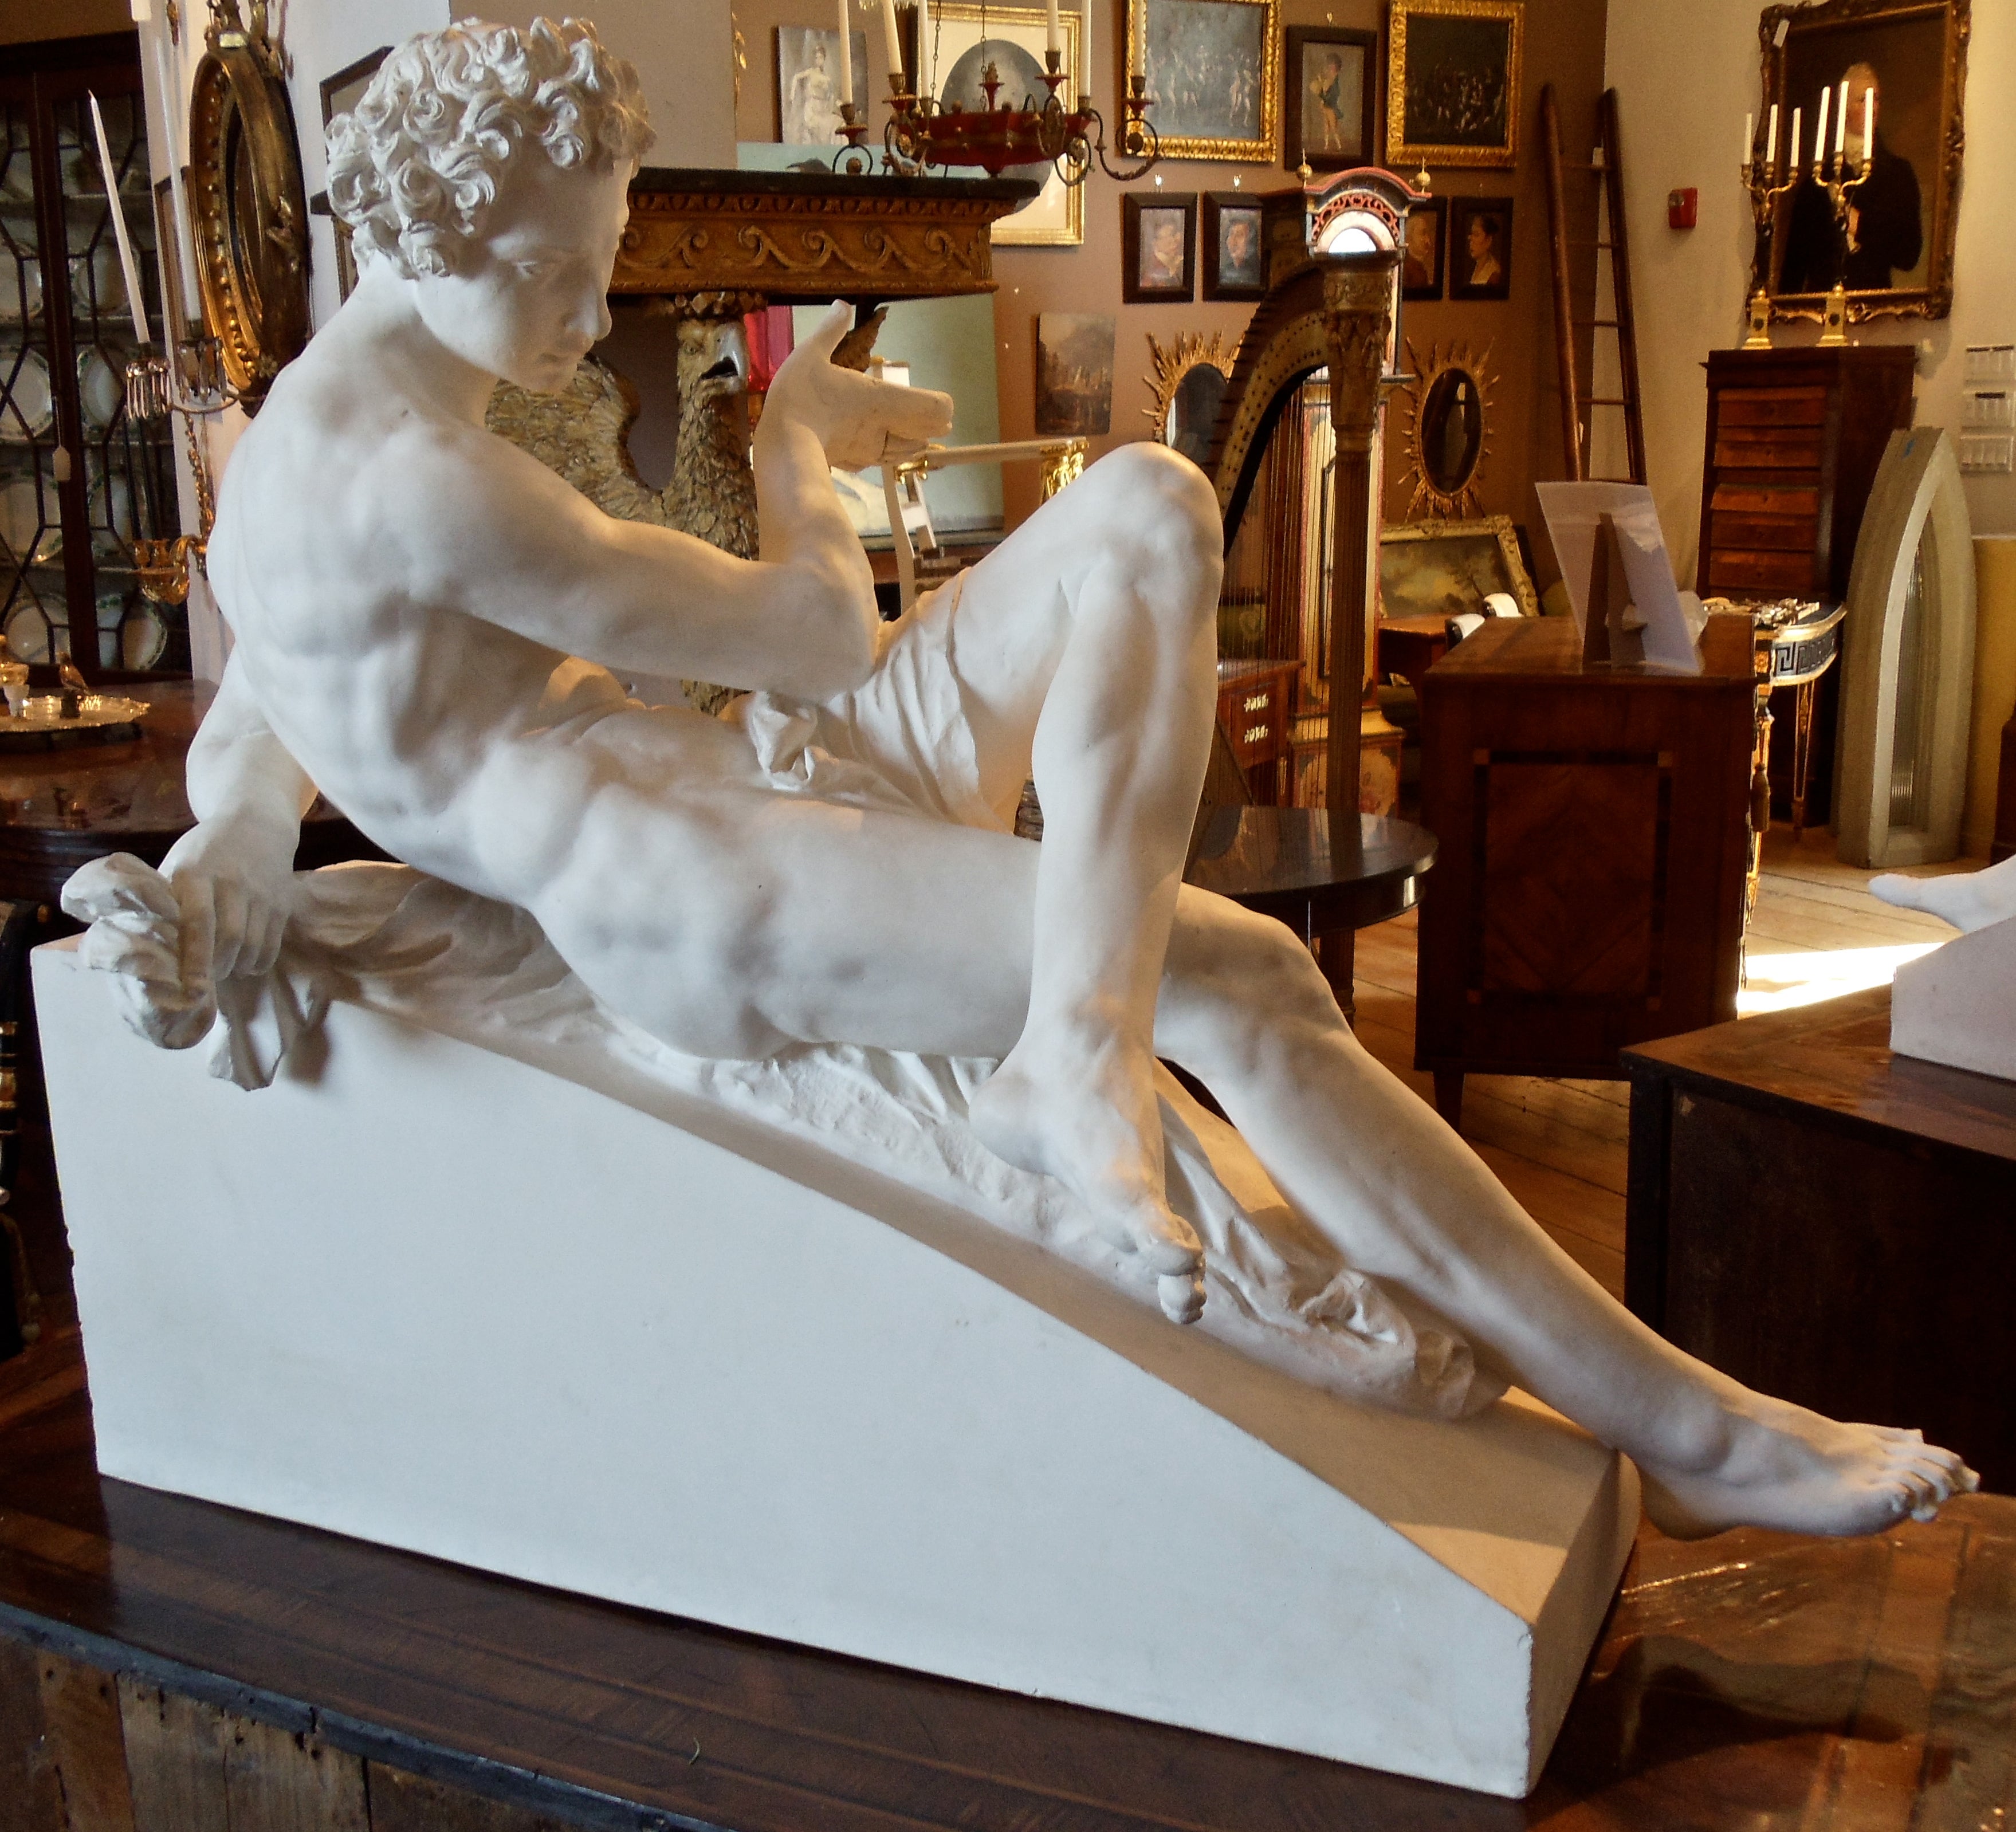 Pair of Large Scale Plaster Sculptures After Michelangelo's Tomb